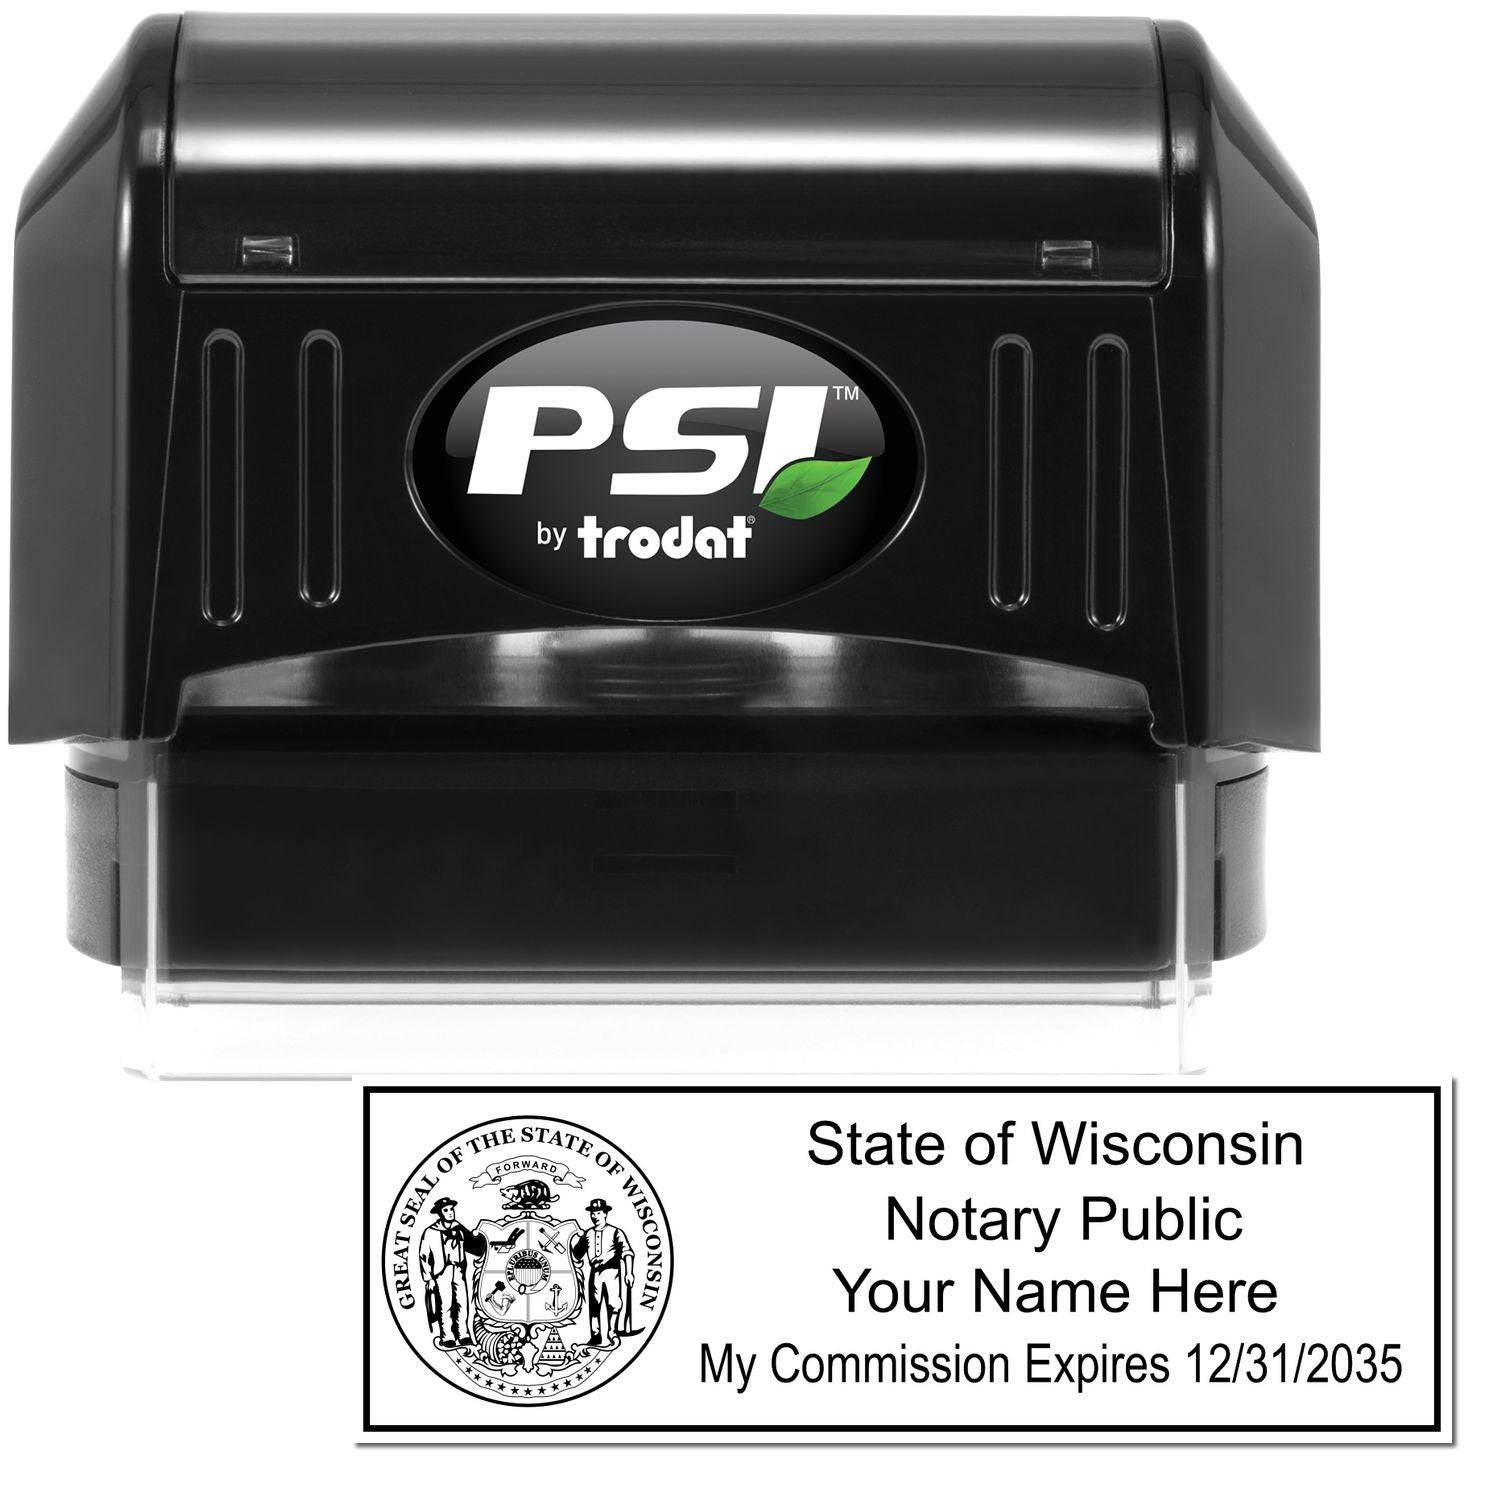 The main image for the PSI Wisconsin Notary Stamp depicting a sample of the imprint and electronic files